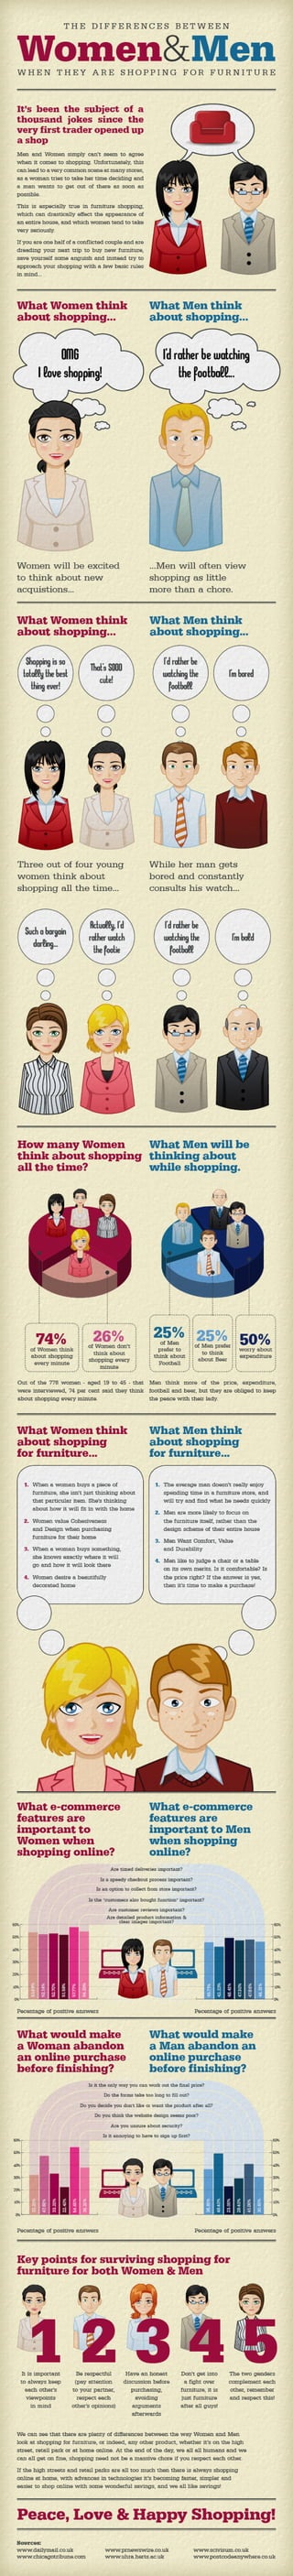 Men and Women - shopping for furniture